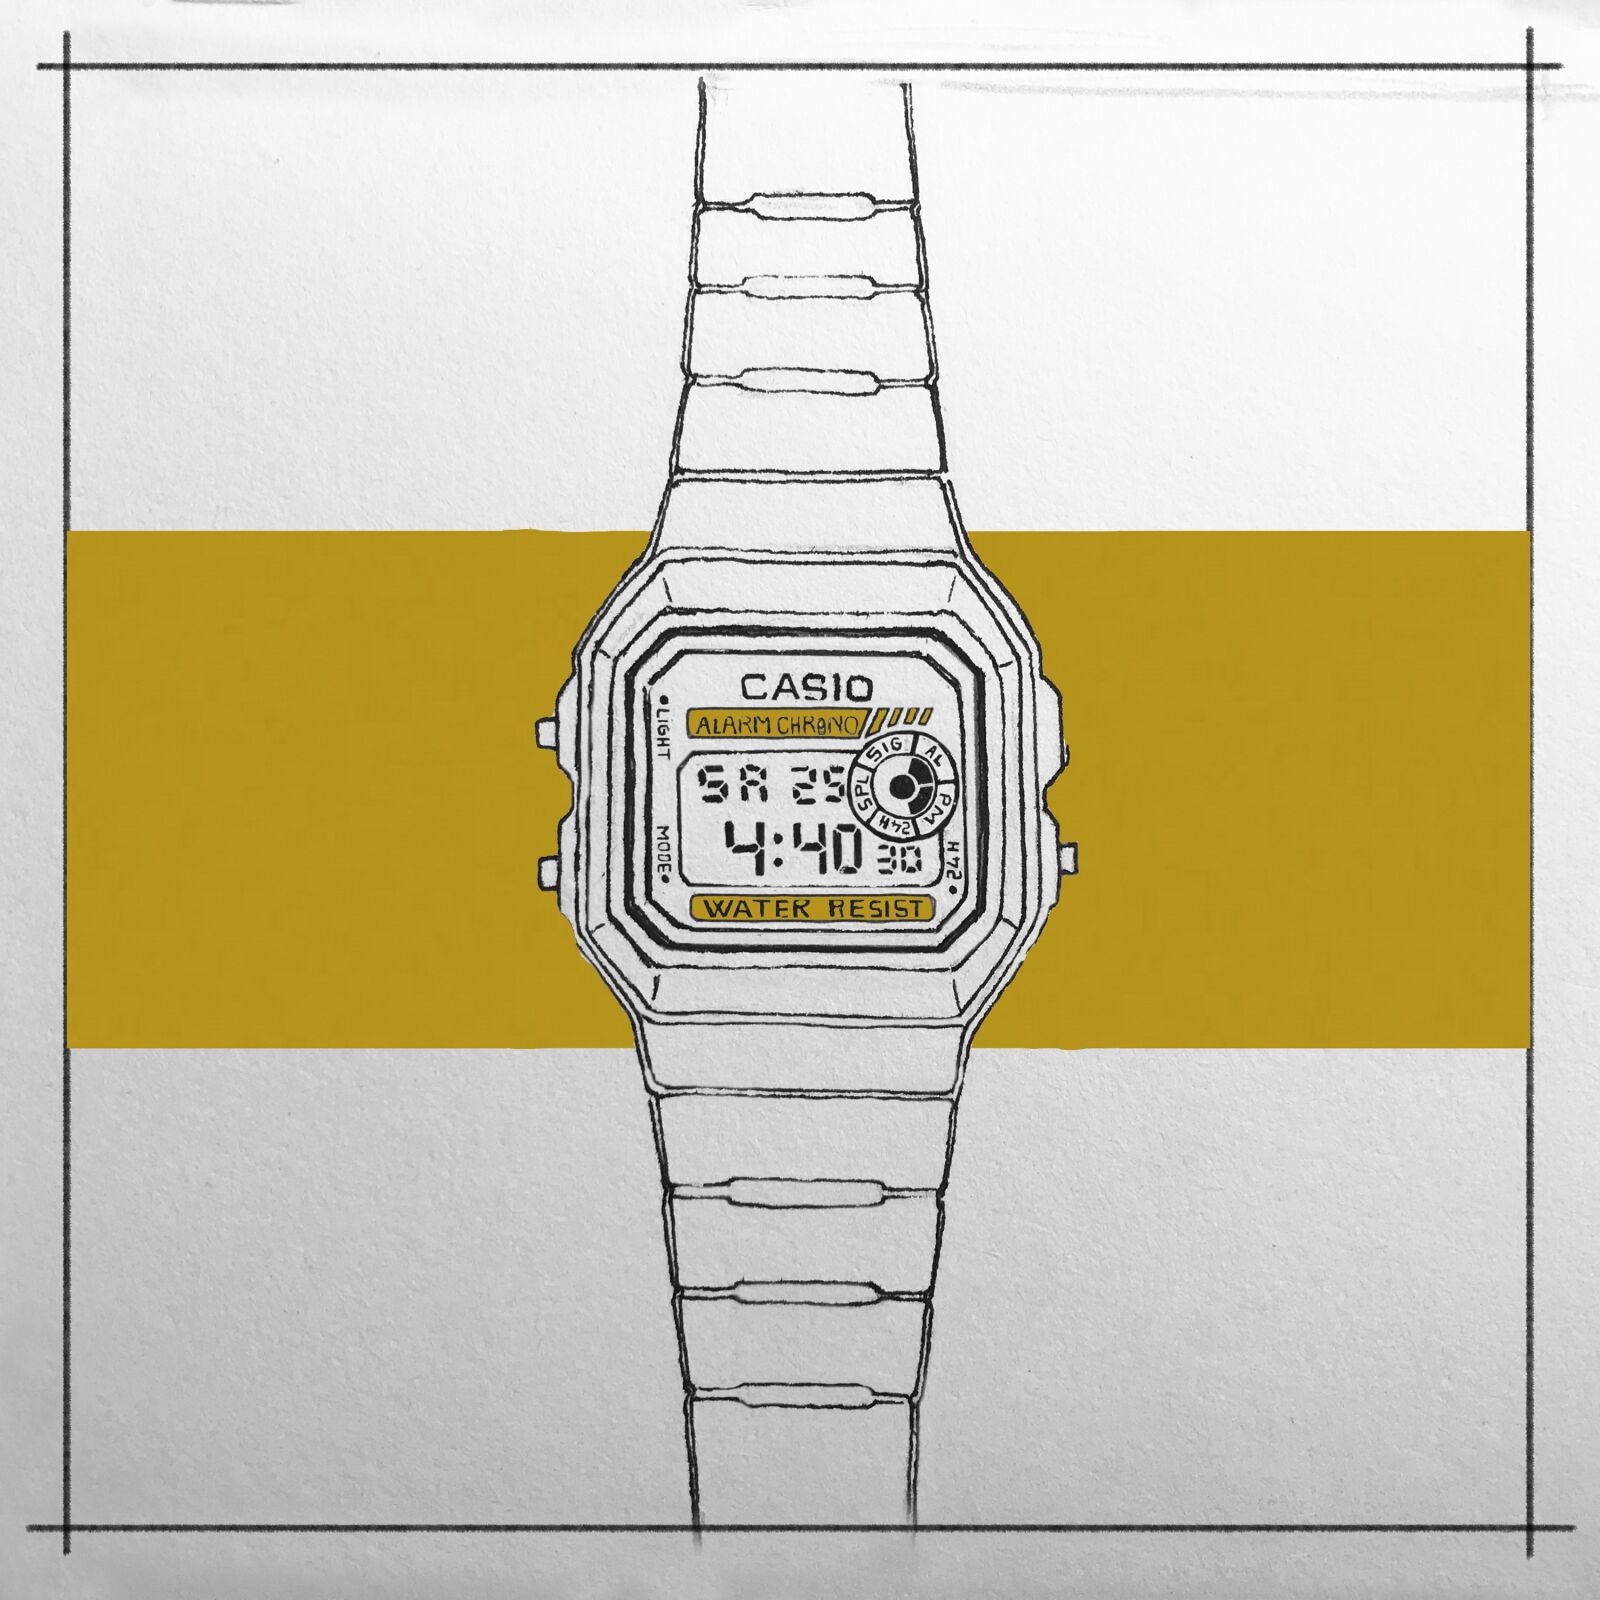 Apple iPhone 7 sample photo. Casio f94w, sketch, watch photography